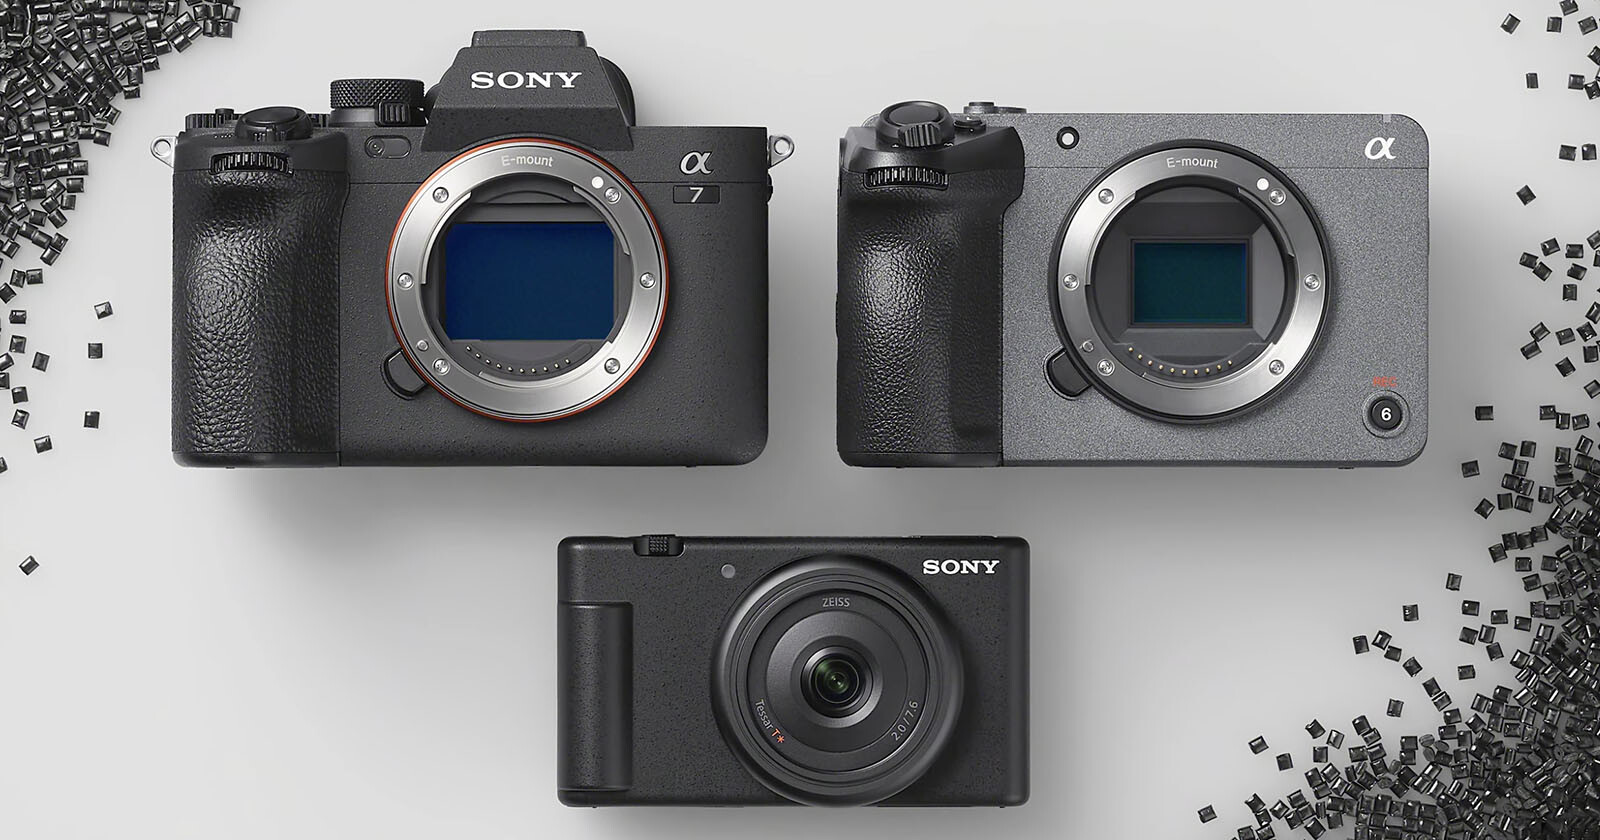  sony makes cameras recycled material called sorplas 